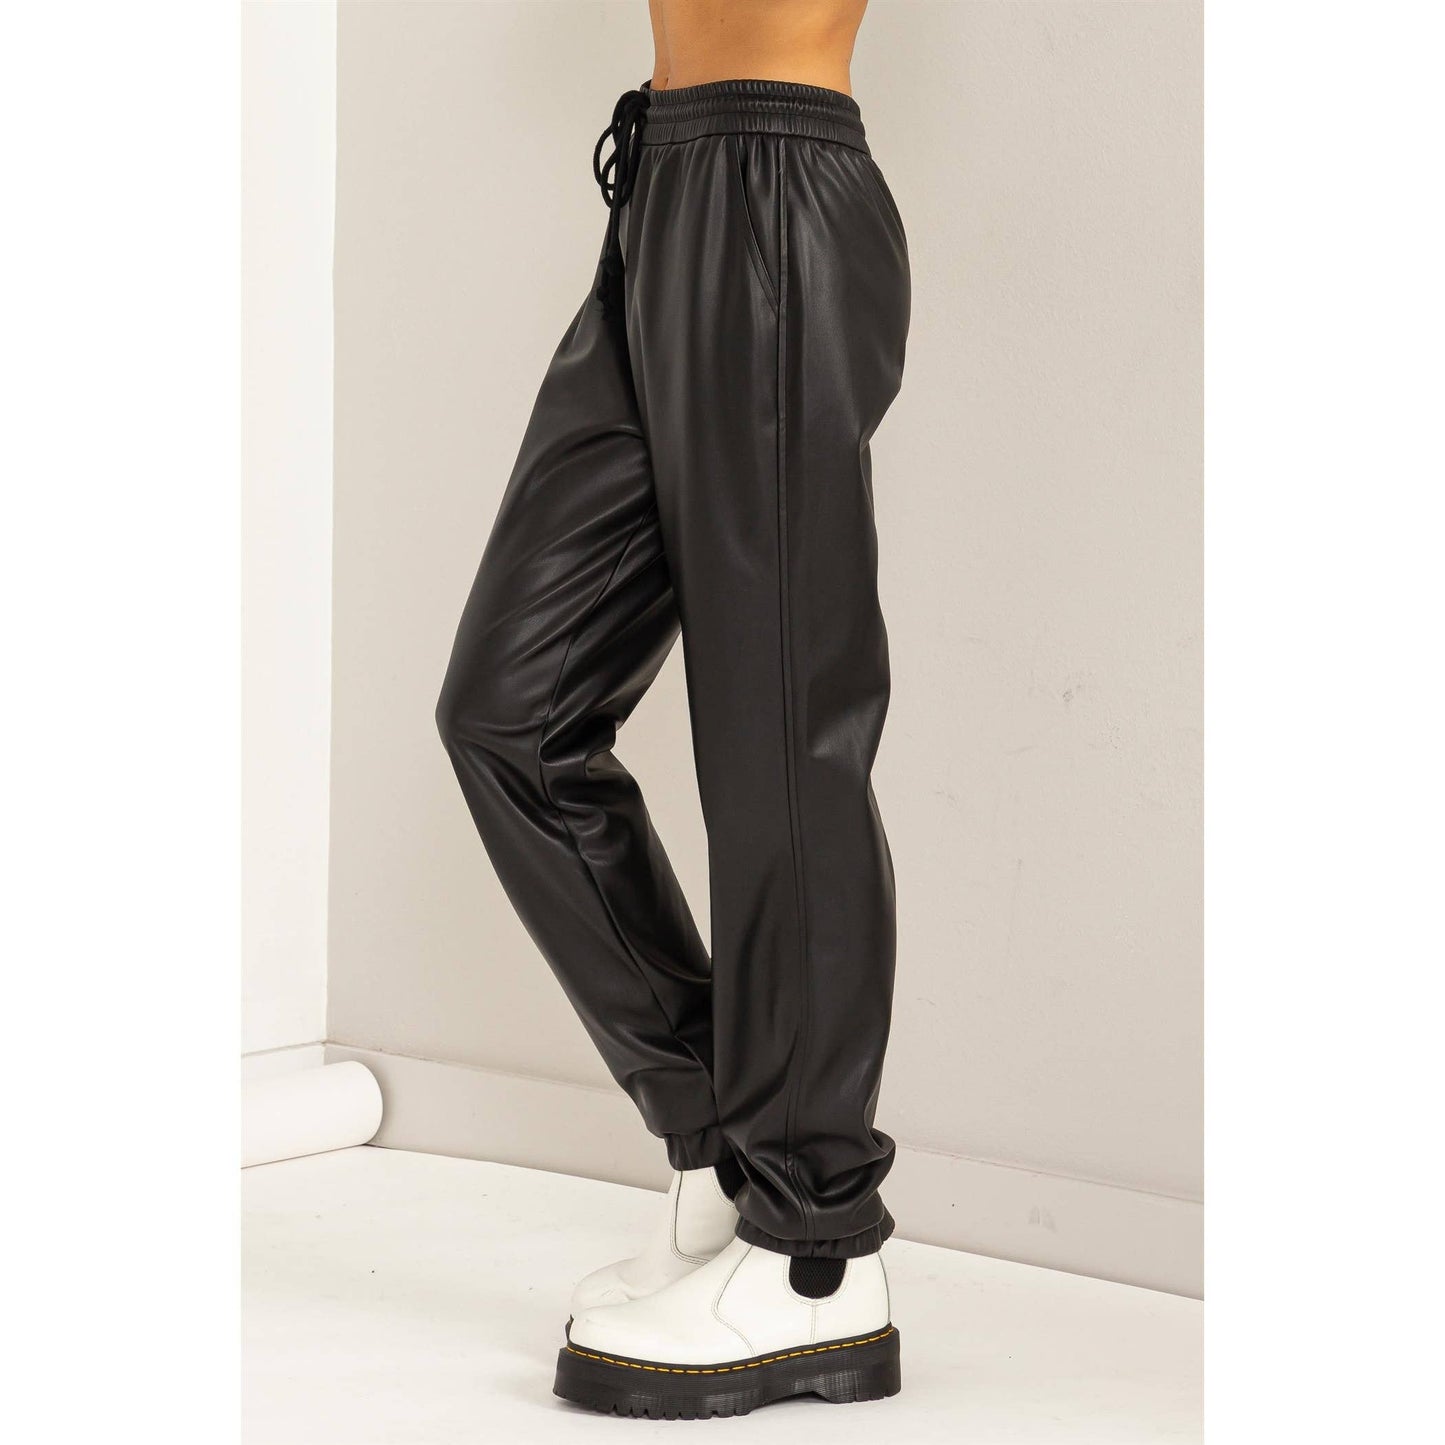 LEATHER DRAWSTRING HIGH-WAISTED JOGGER PANTS: BLACK / S